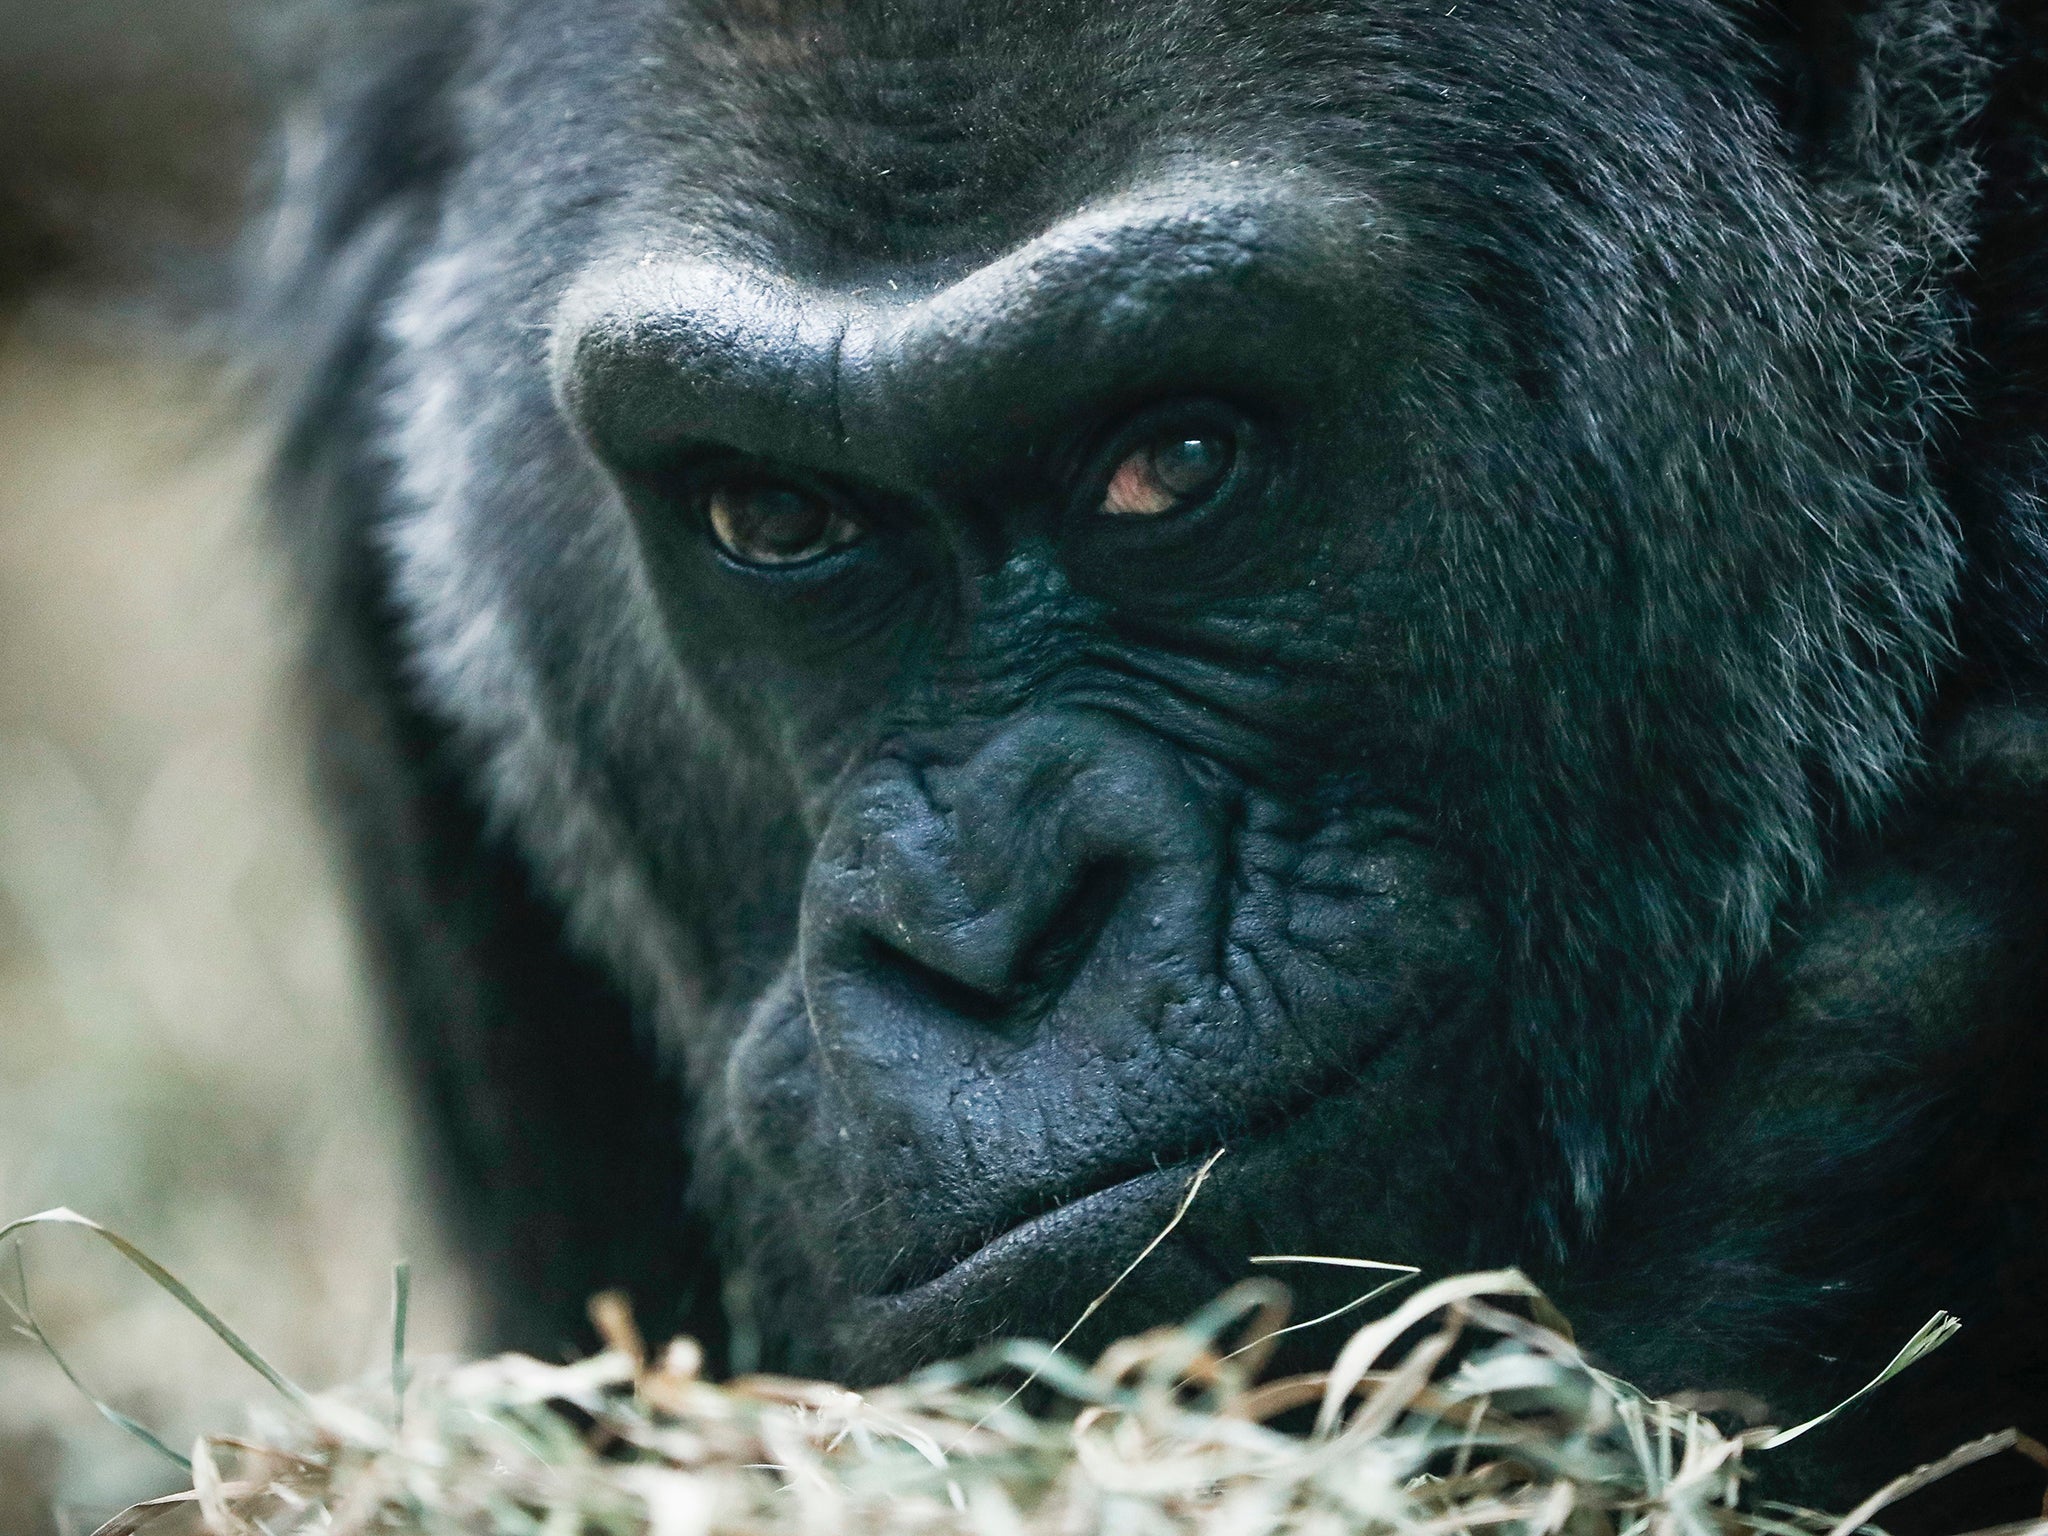 Colo, a western lowland gorilla, rests in her enclosure at the Columbus Zoo in Ohio